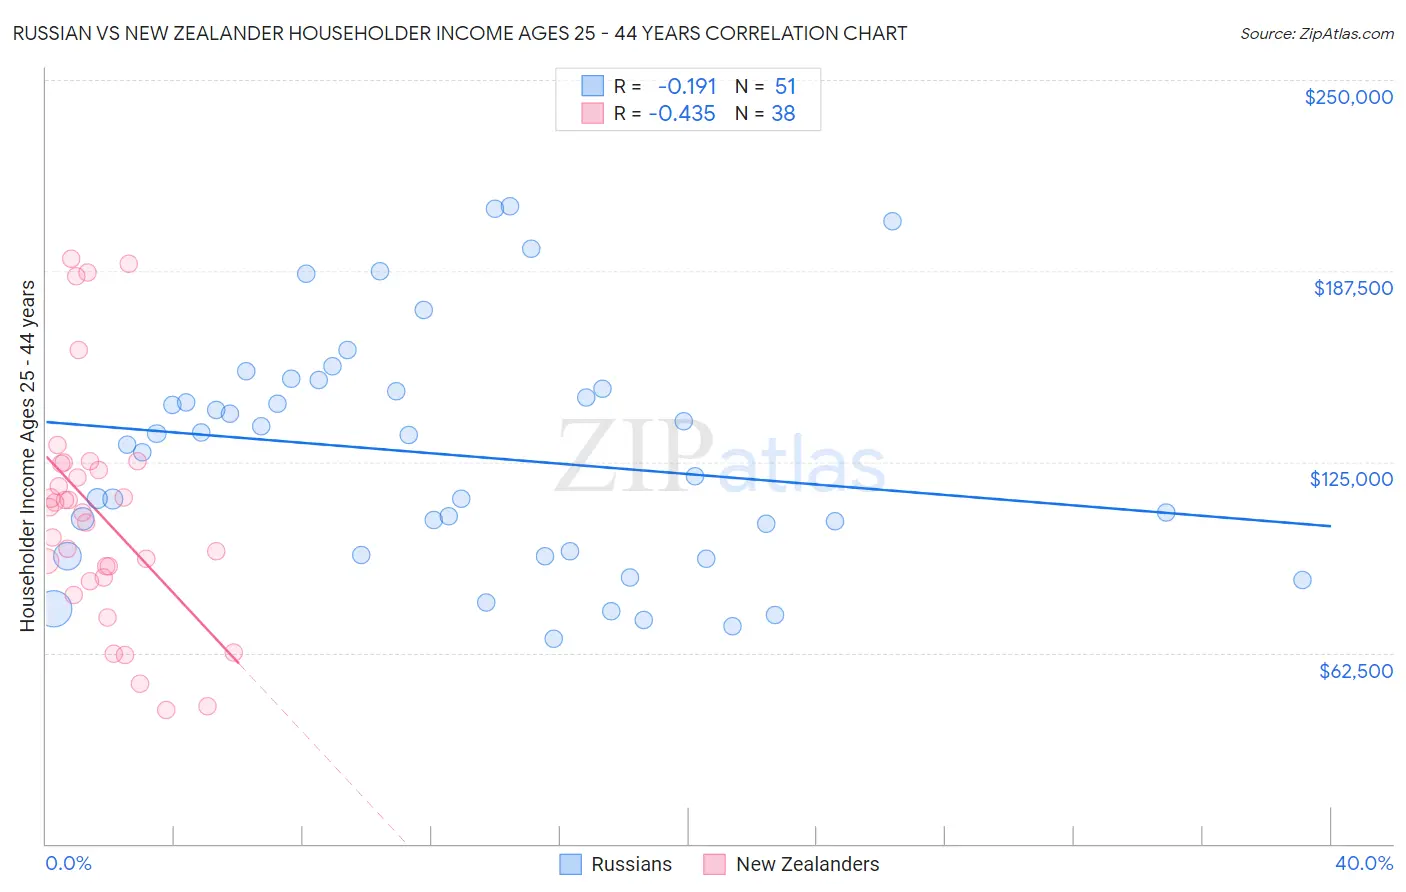 Russian vs New Zealander Householder Income Ages 25 - 44 years